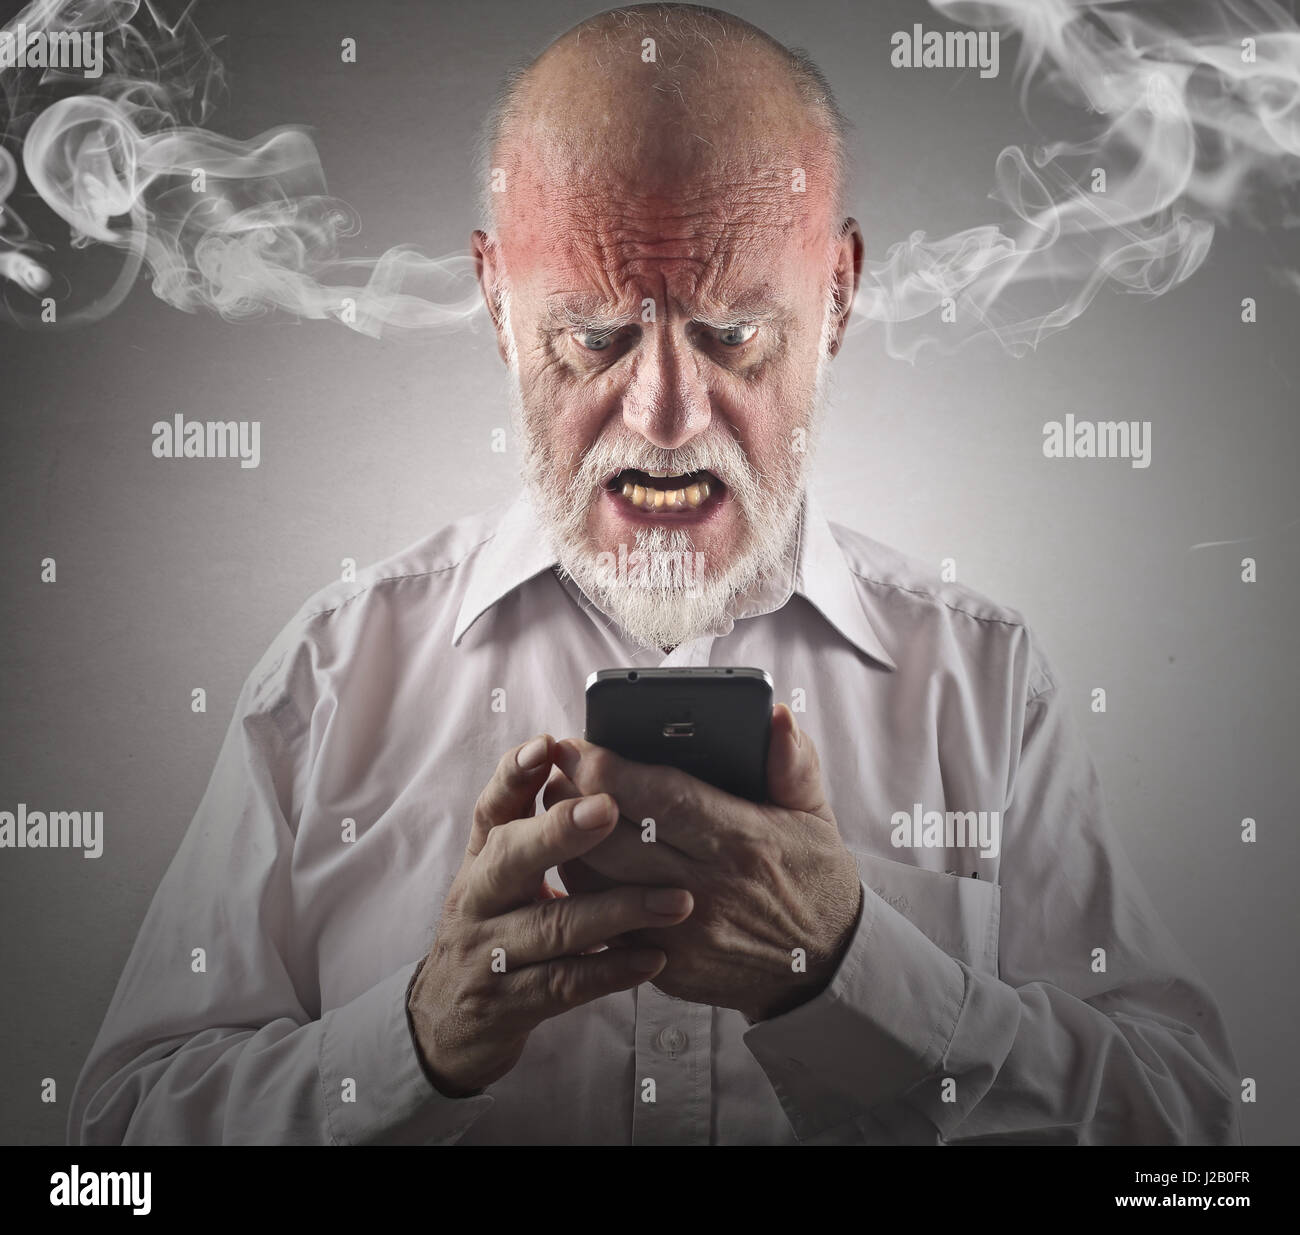 Mad old man, steam coming out of his ears Stock Photo